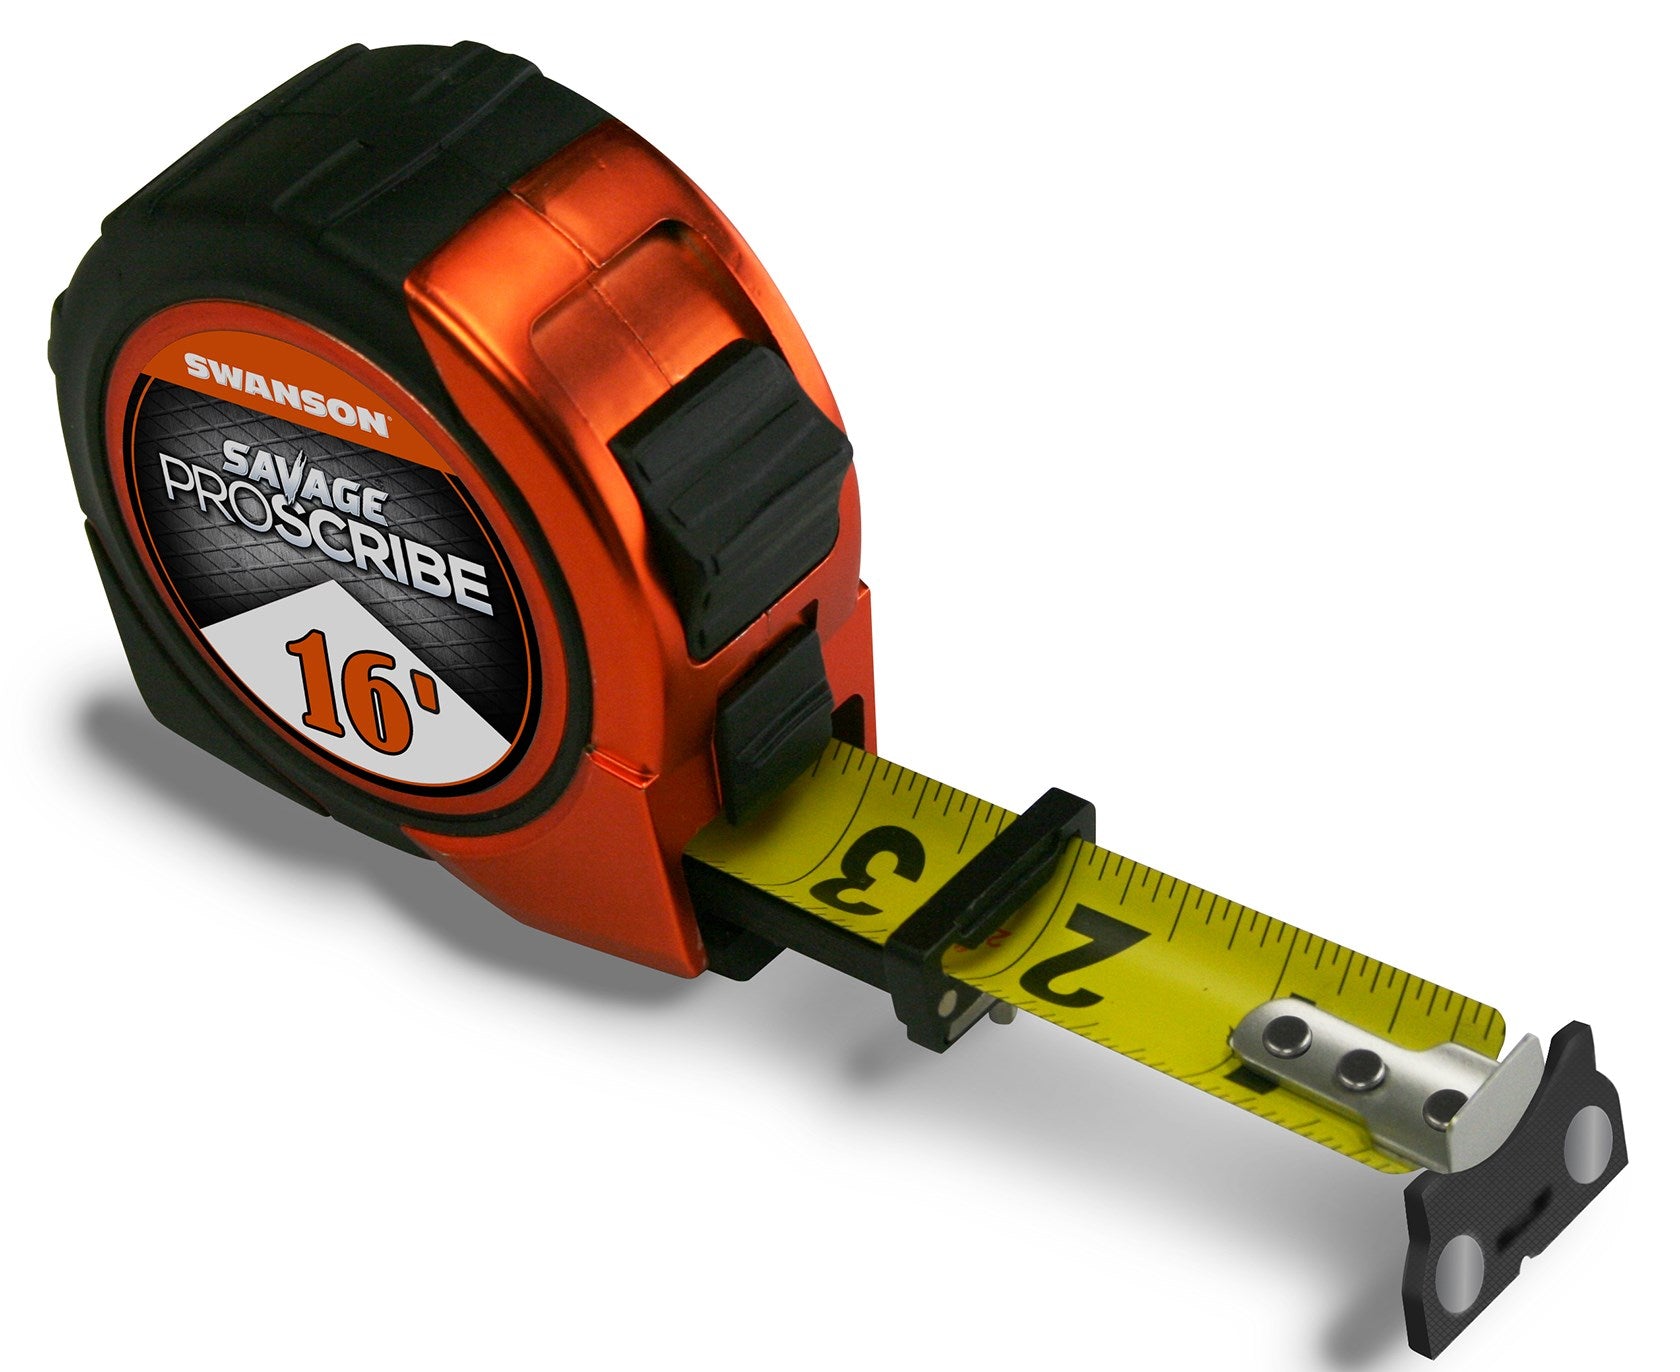 SWANSON TOOL CO INC., Swanson Savage ProScribe 16 ft. L X 1 in. W Tape Measure 1 pk